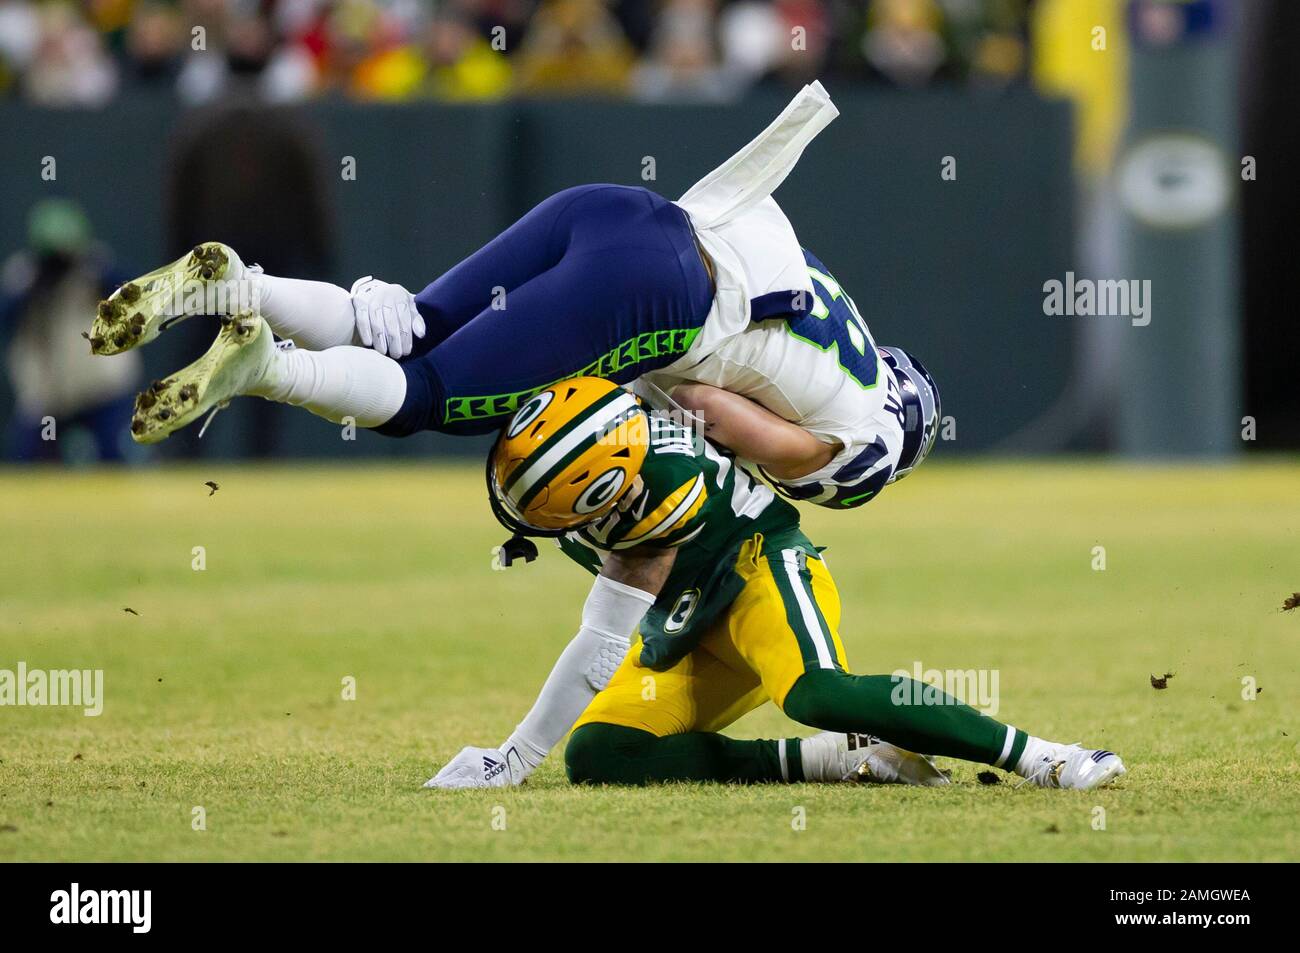 Green Bay, USA. 12th Jan, 2020. January 12, 2020: Green Bay Packers  cornerback Jaire Alexander #23 upends Seattle Seahawks tight end Jacob  Hollister #48 in the first quarter of the NFL Football